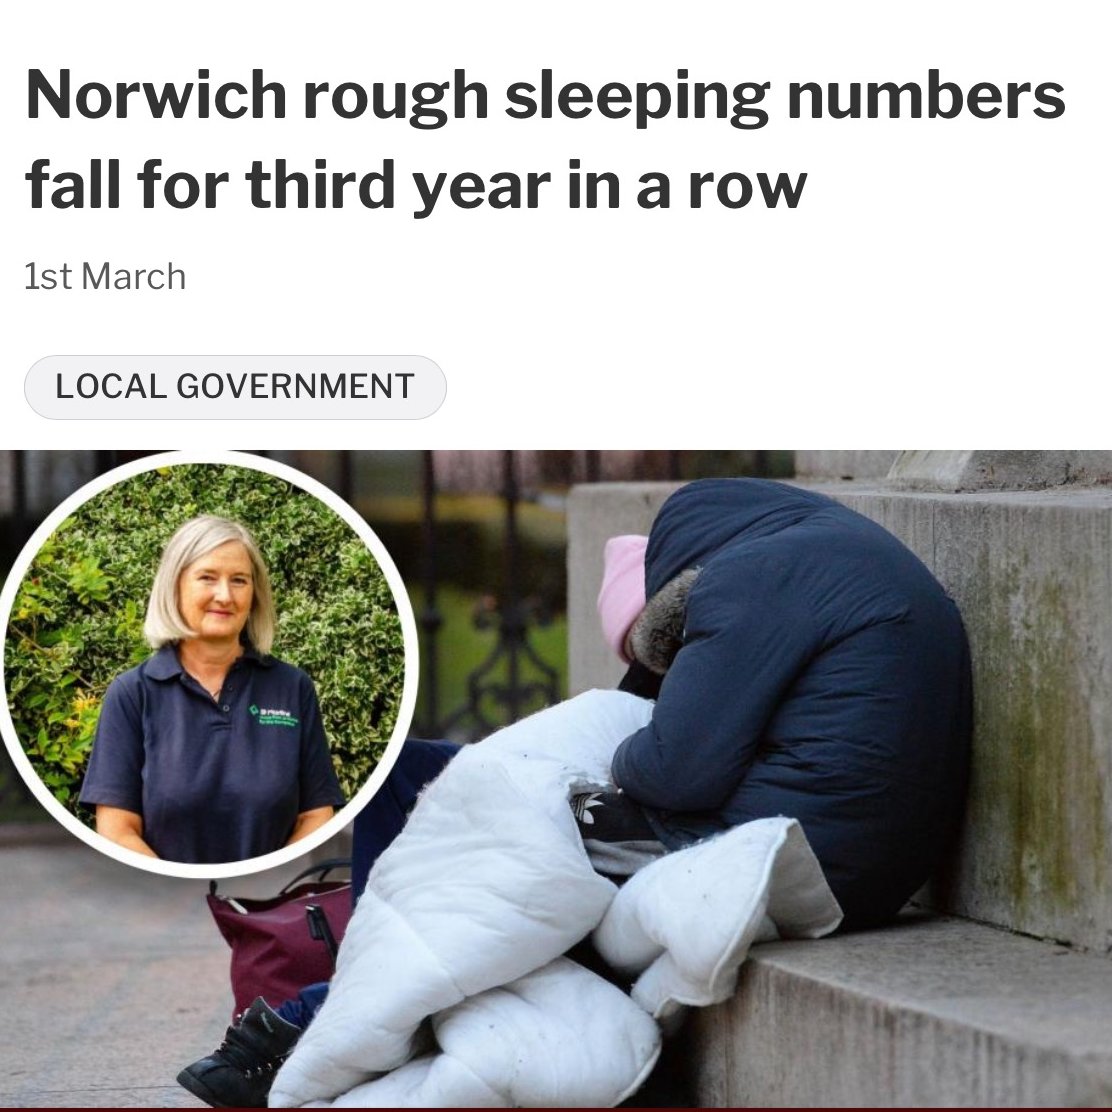 Allowing people to sleep rough is a political choice. Labour-run Norwich City Council have worked with local charities to decrease rough sleeping numbers for a third consecutive year. A remarkable achievement which shows the solutions to end homelessness are at our fingertips.